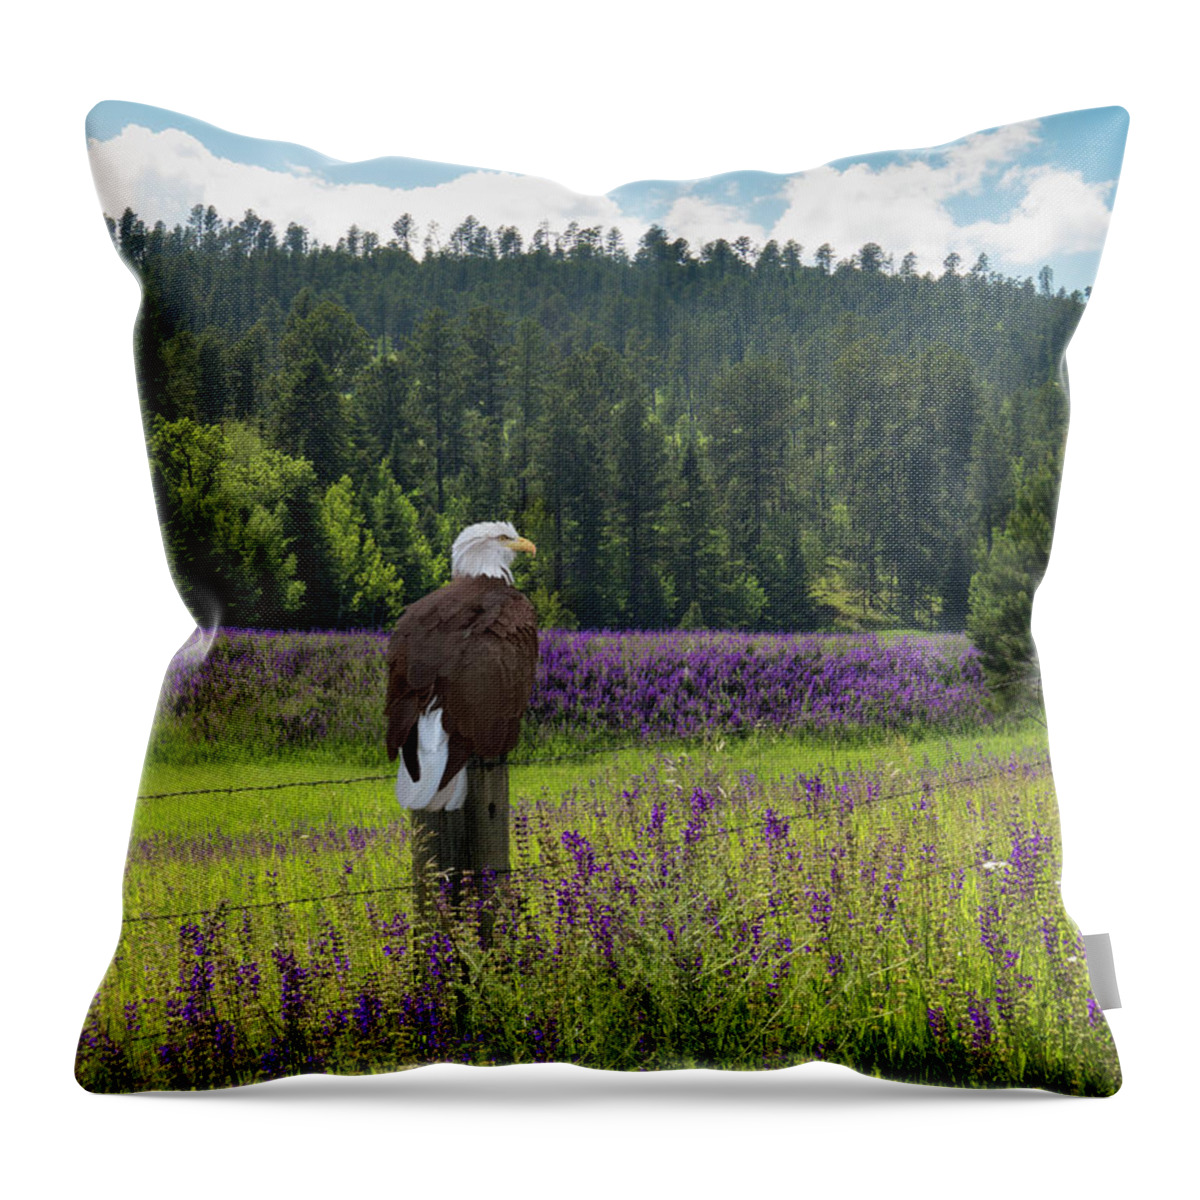 Eagle Throw Pillow featuring the photograph Eagle on Fence Post by Patti Deters